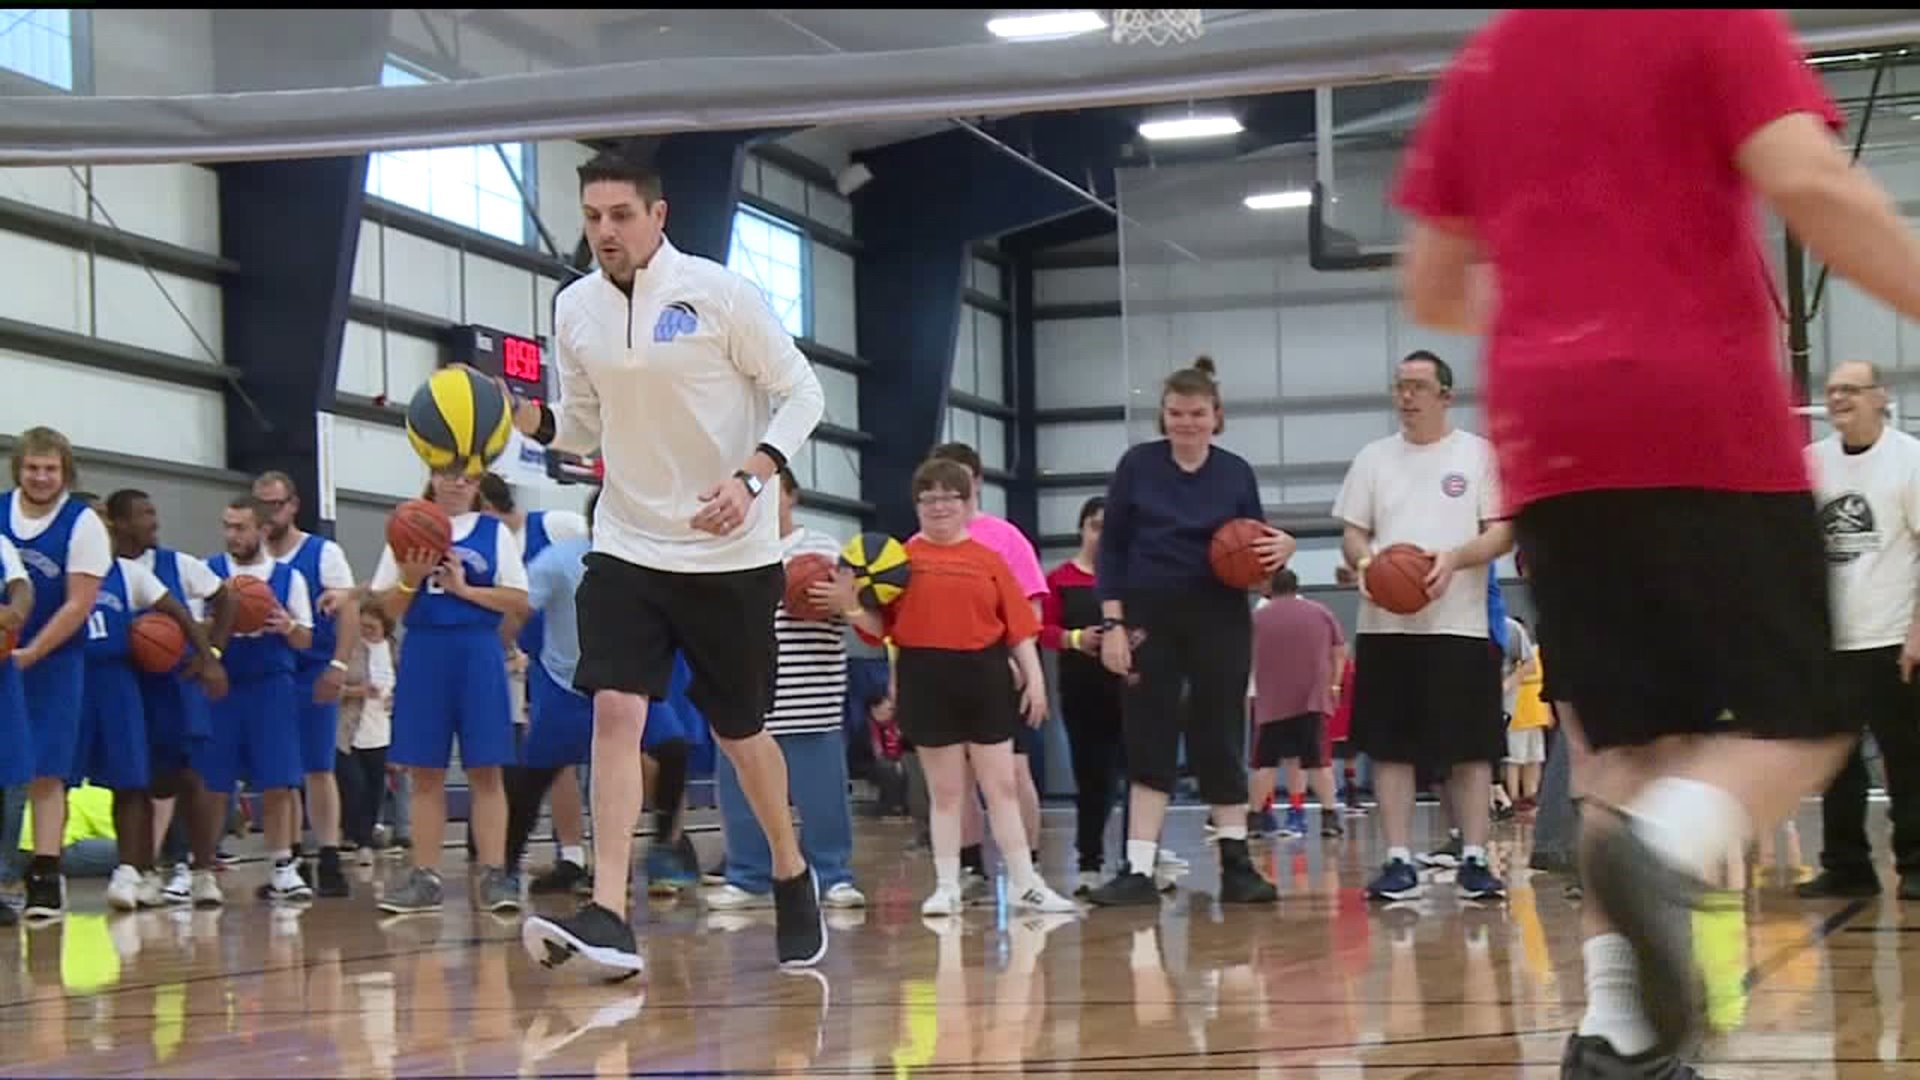 Basketball camp in Sterling provides rare opportunity for differently abled athletes